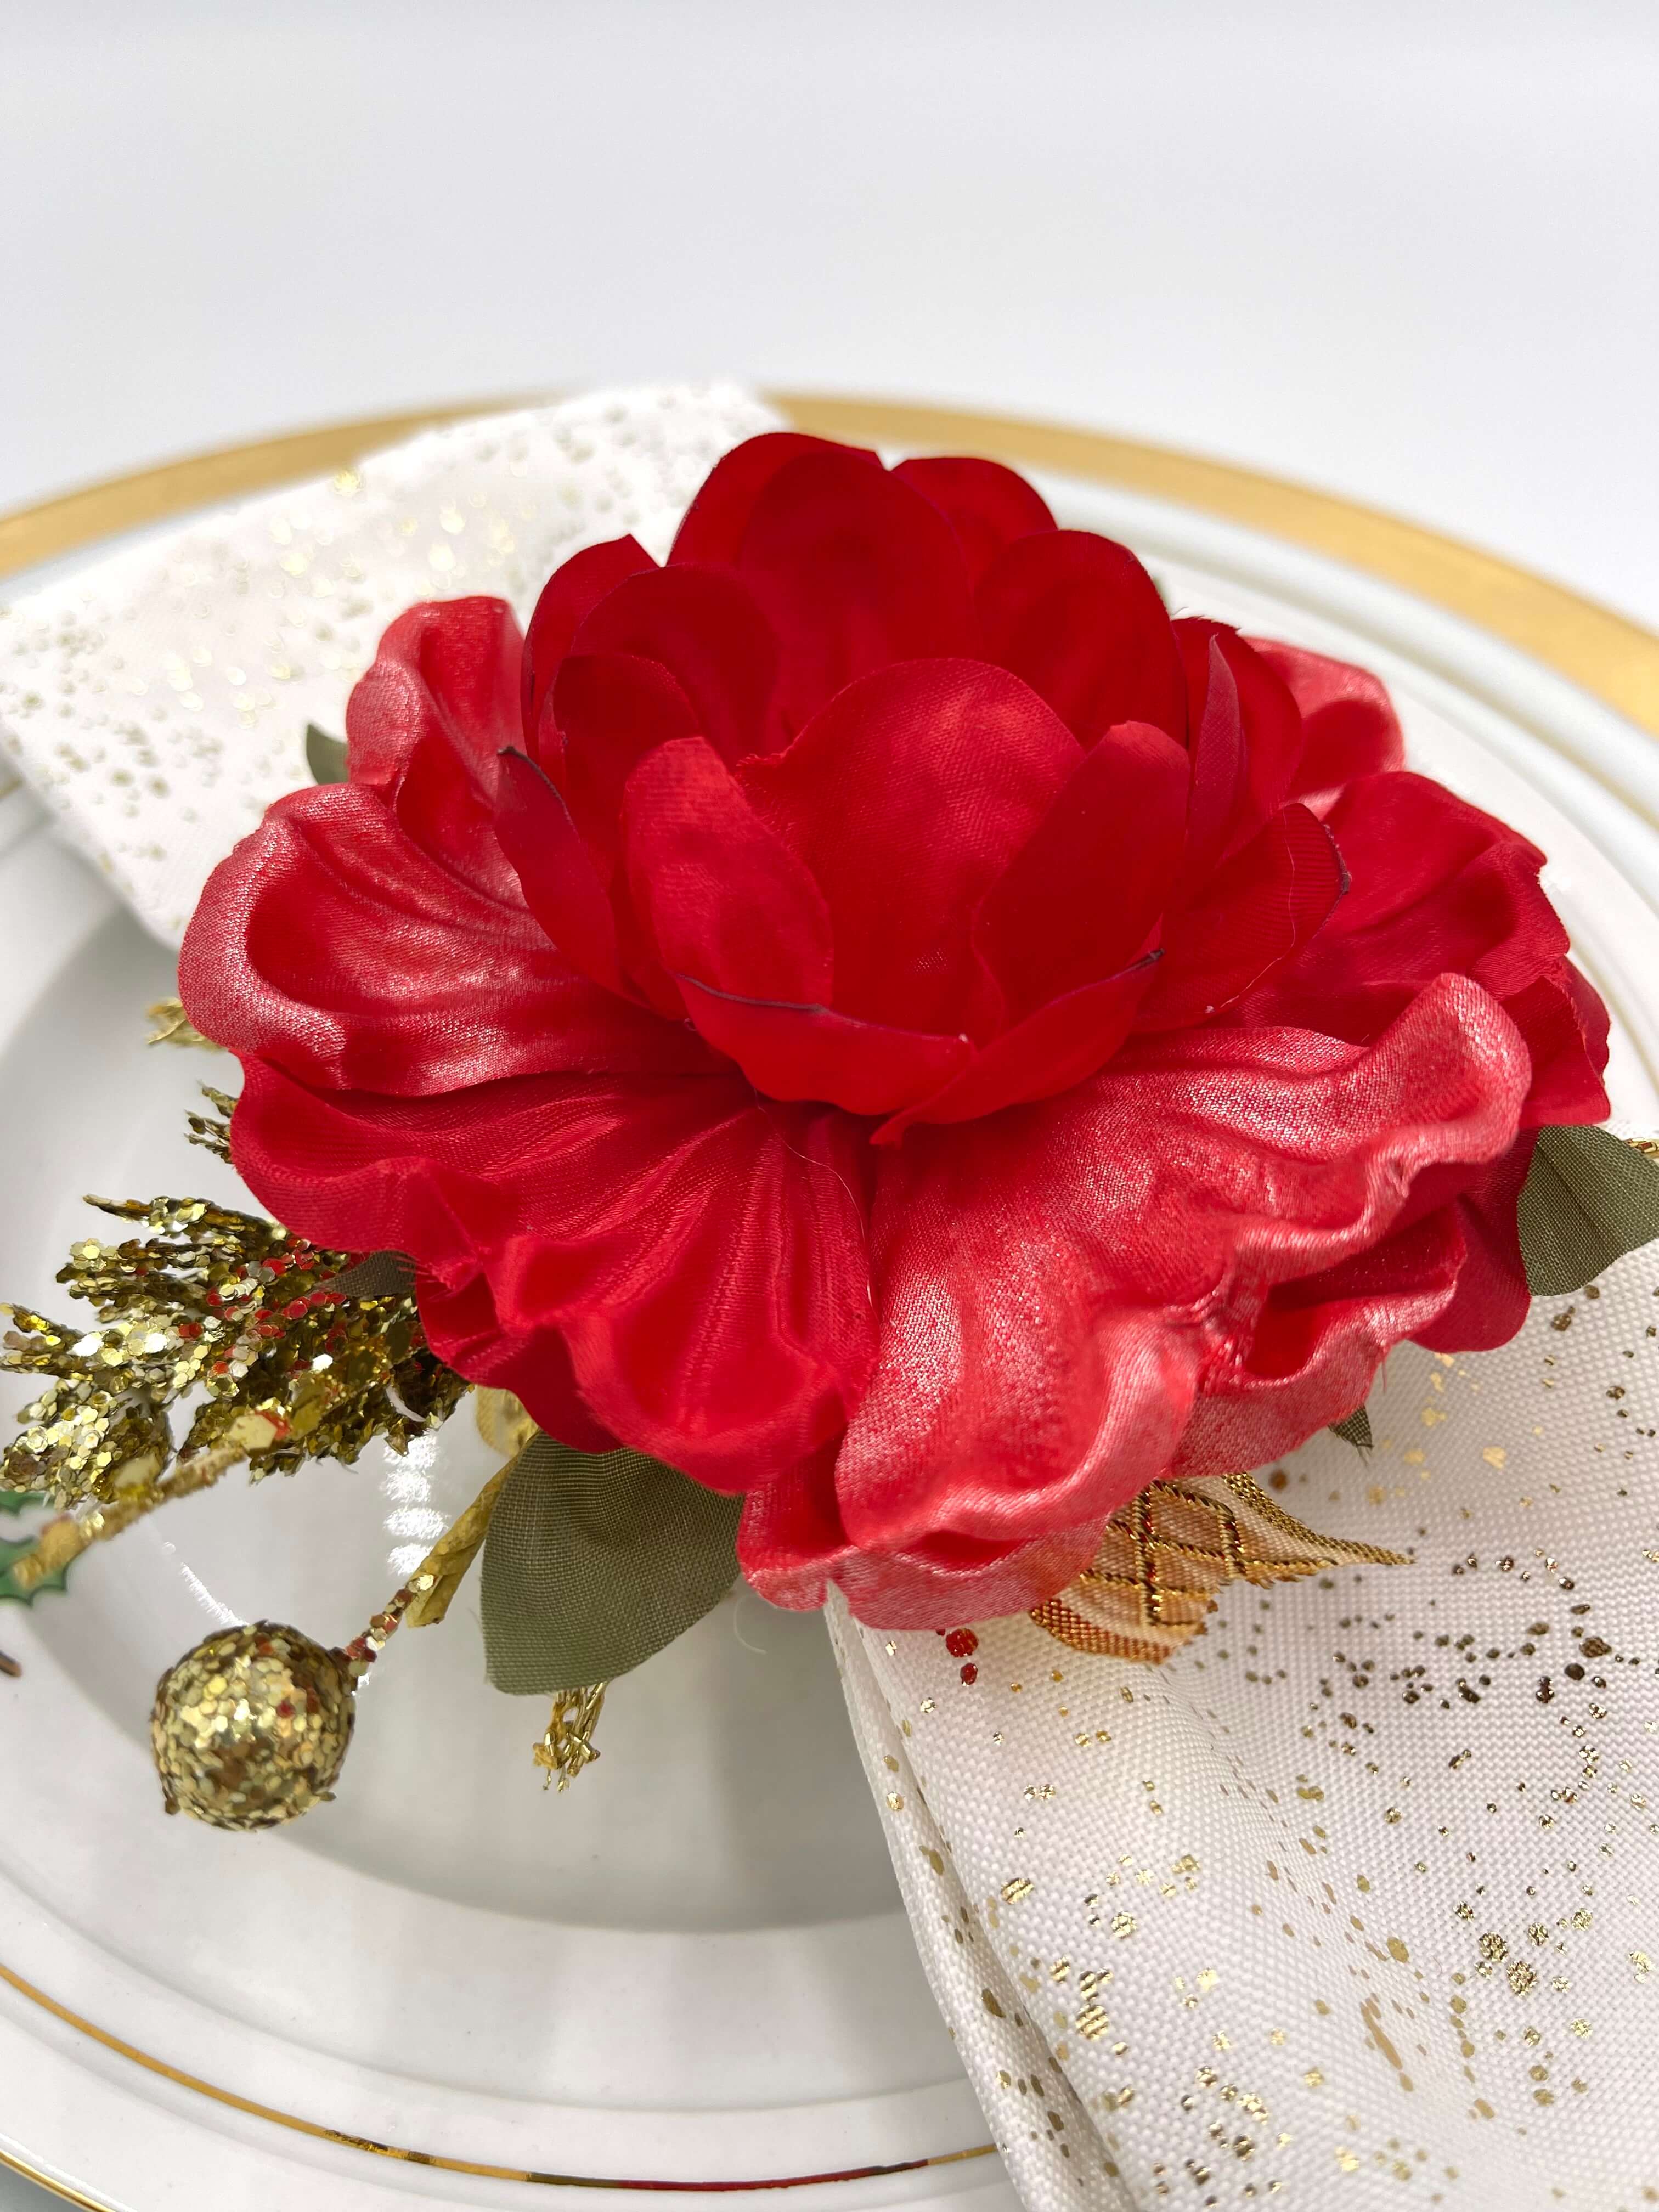 Holidays Home Decor Napkin Rings. Red Flowers Table Escape Decoration. Christmas Gift Idea